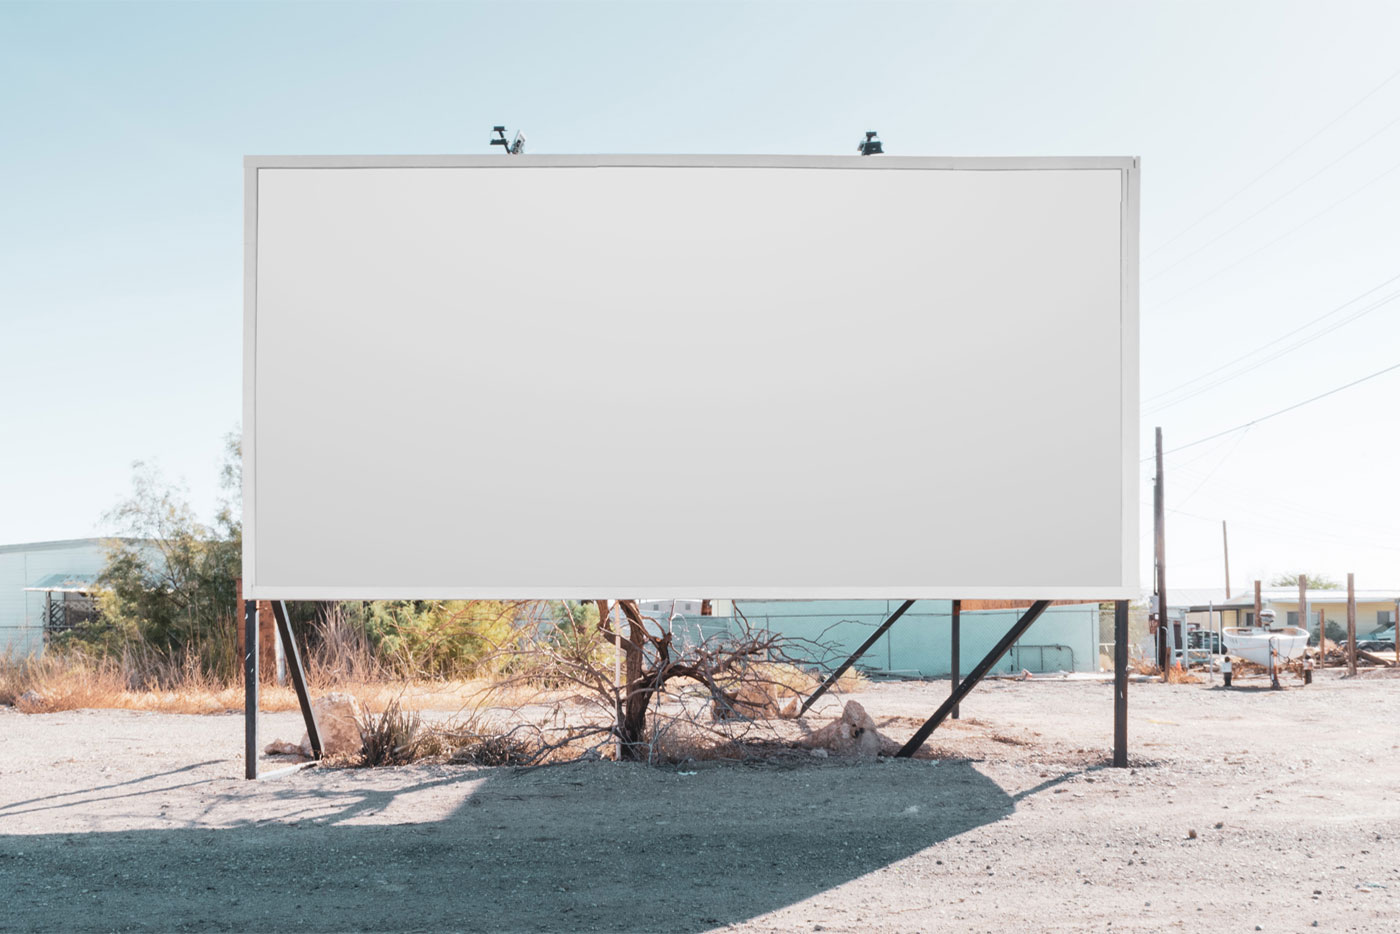 Horizontal Billboard Placed on a County Road Mockup FREE PSD